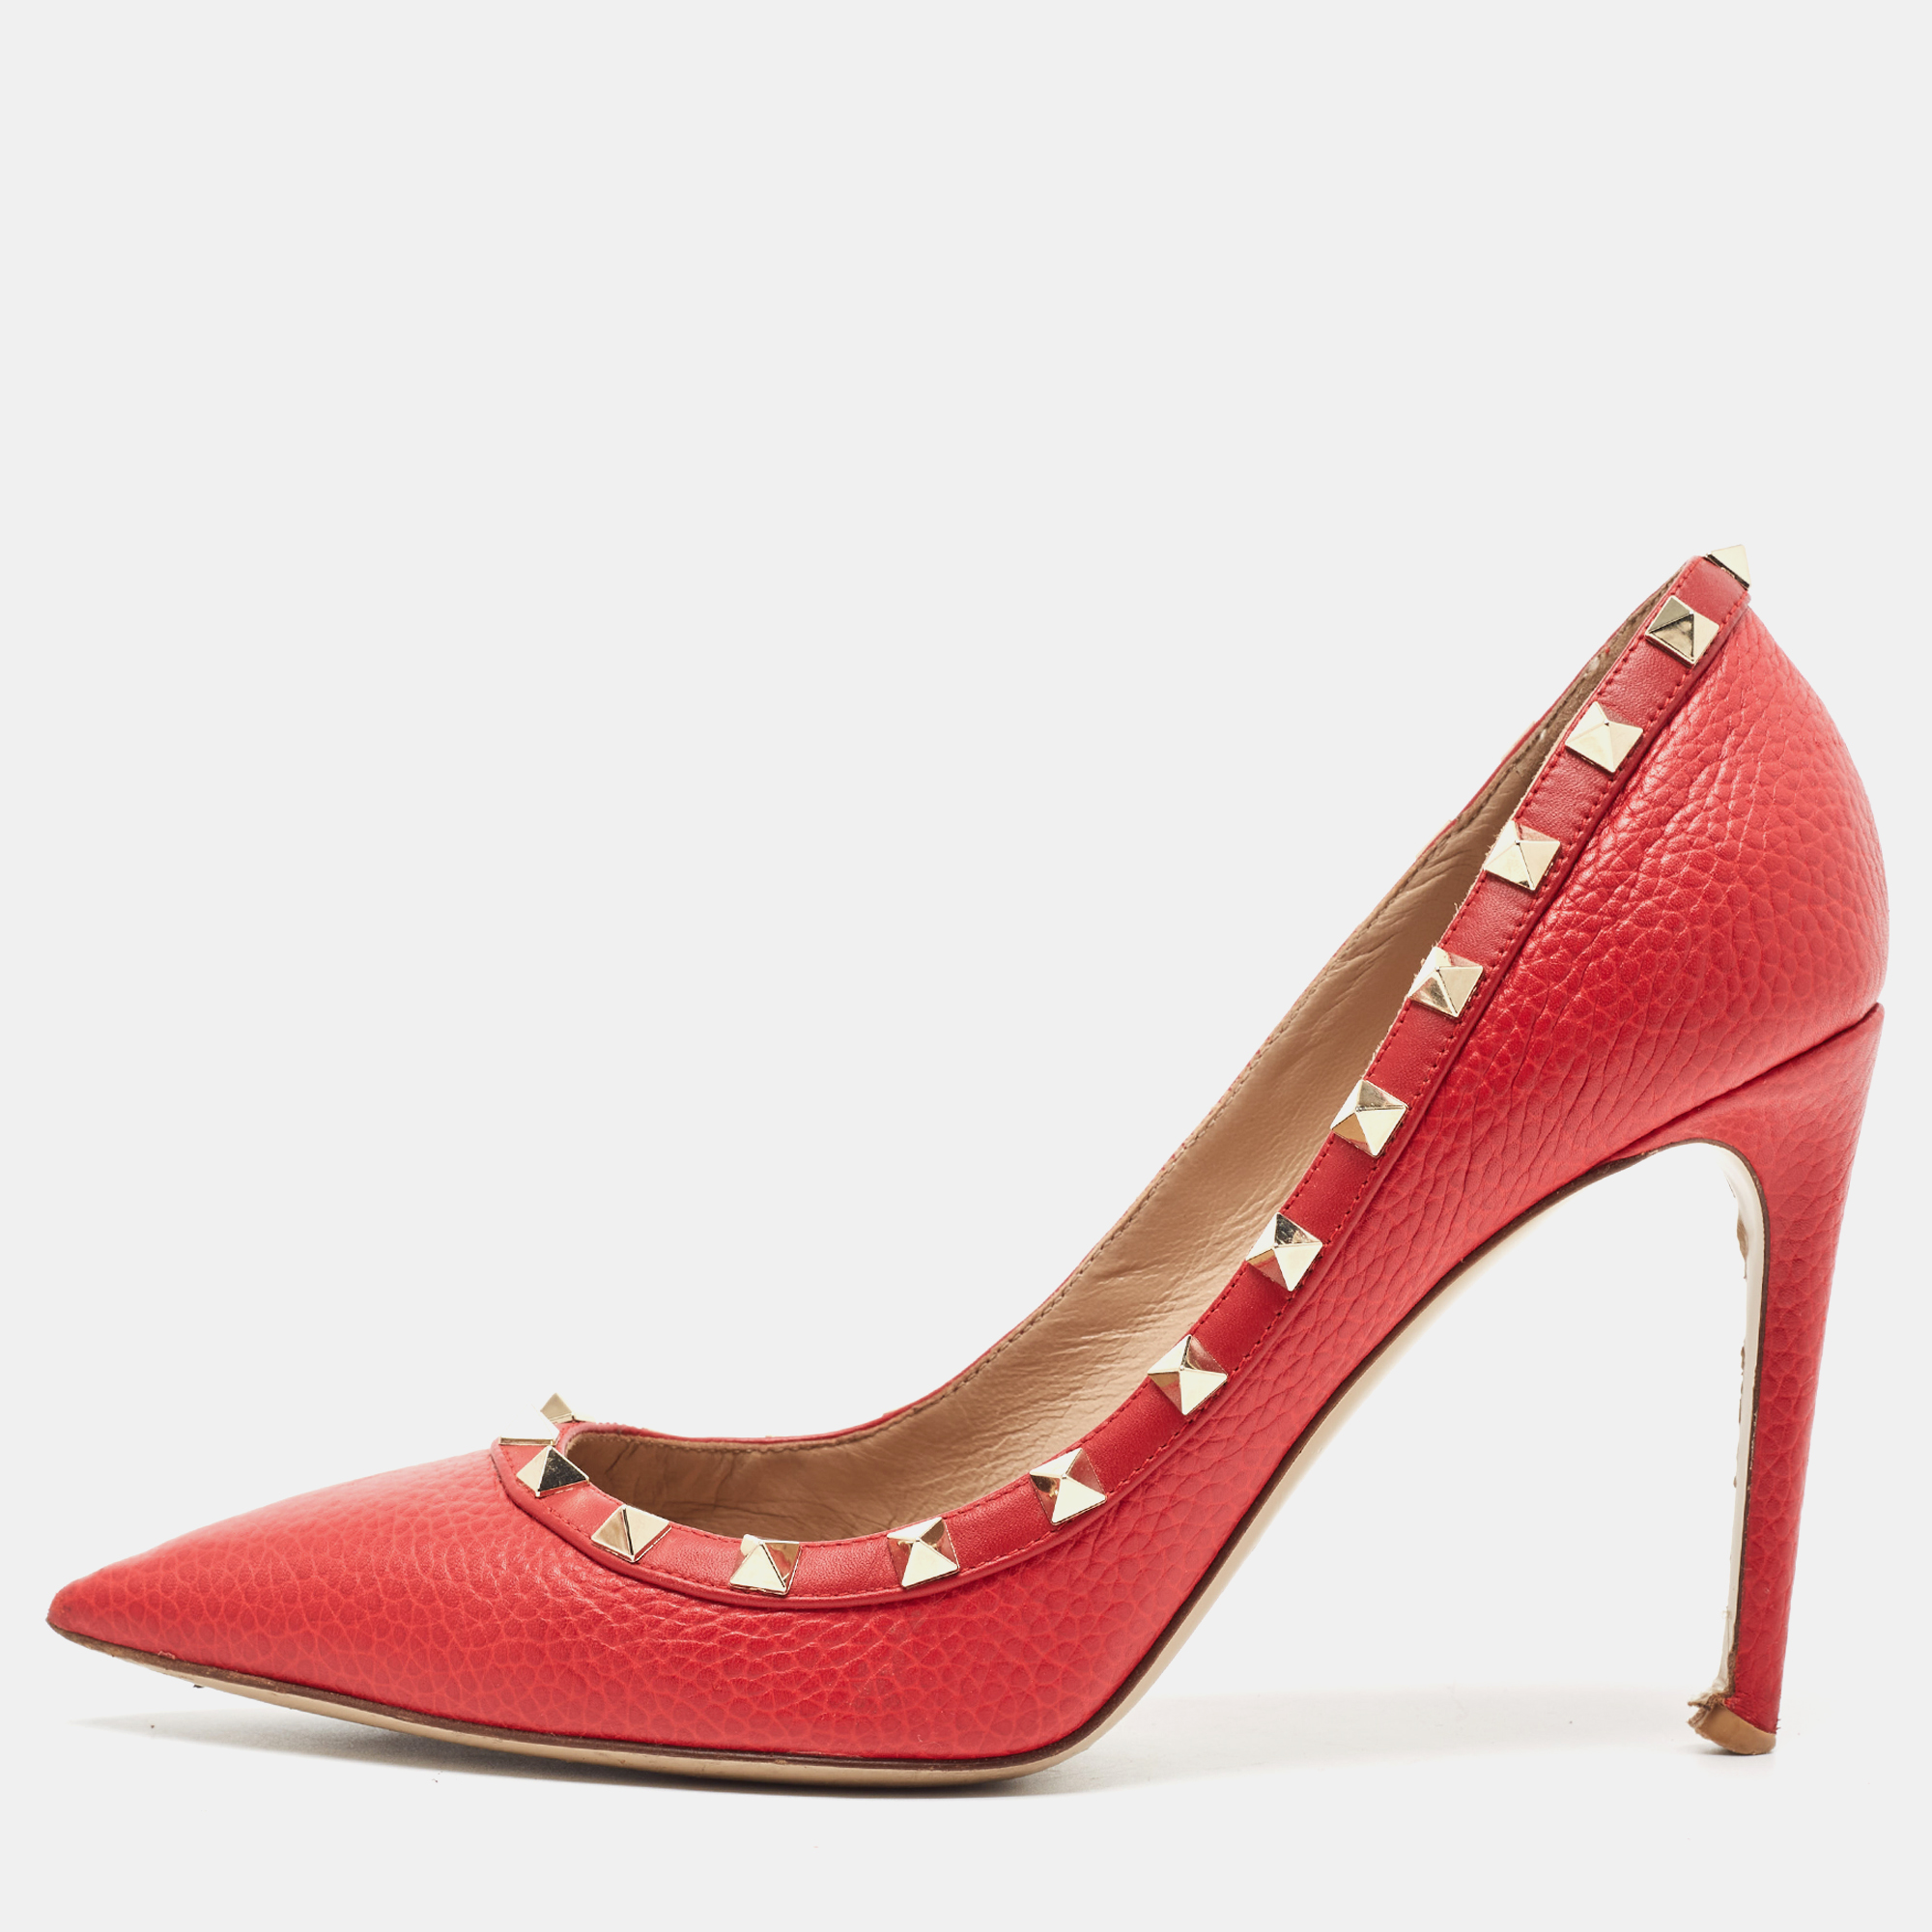 Valentino Red Grained Leather Rockstud Pumps Size 40.5